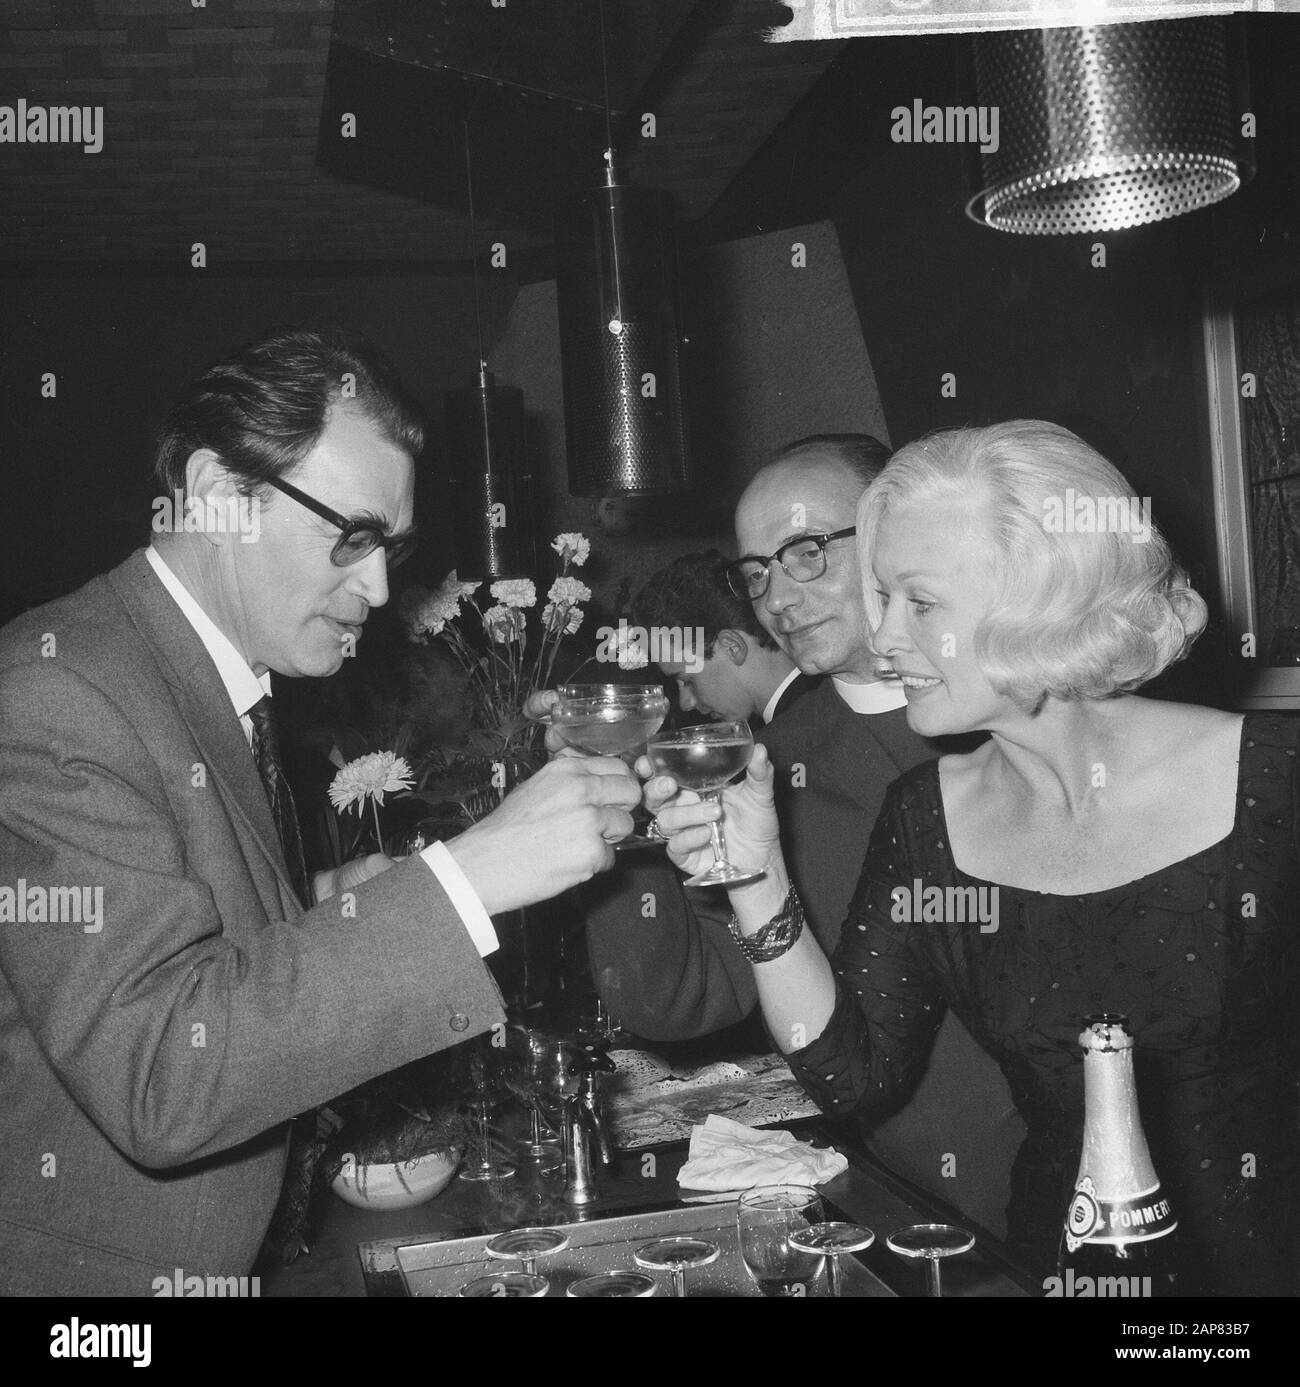 Artists-Society at Hilversum opened, Godfried Boman (l) and right ventriloquist Carla with middle chaplain Theo Kloeg Date: September 6, 1965 Location: Hilversum, Noord-Holland Keywords : chaplains Personal name: Bomans, Godfried, Kloeg, Theo Stock Photo